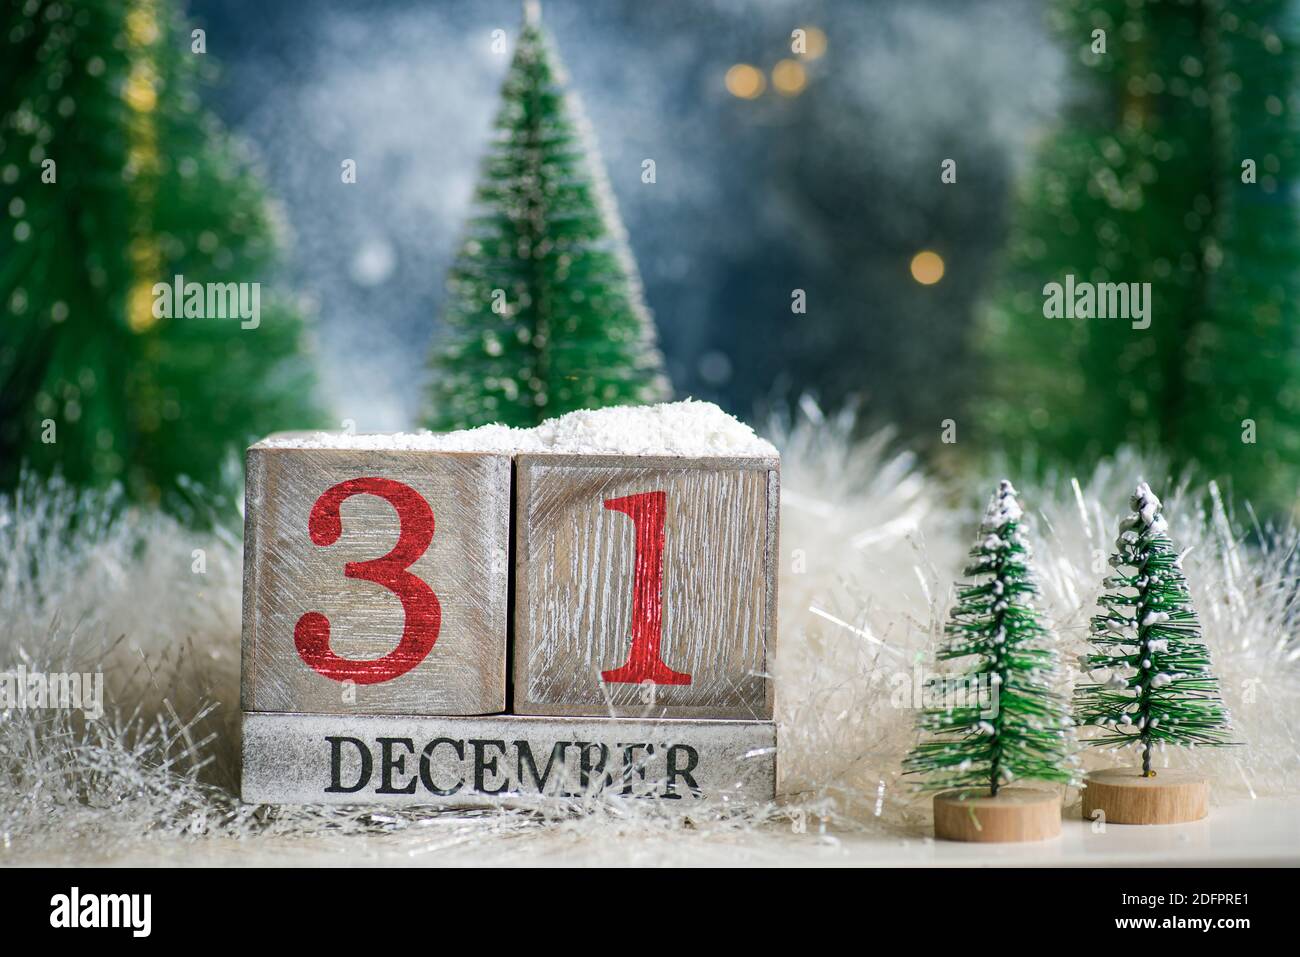 31st December sign for New Year's eve and Christmas tree winter holiday festive background and ornaments Stock Photo